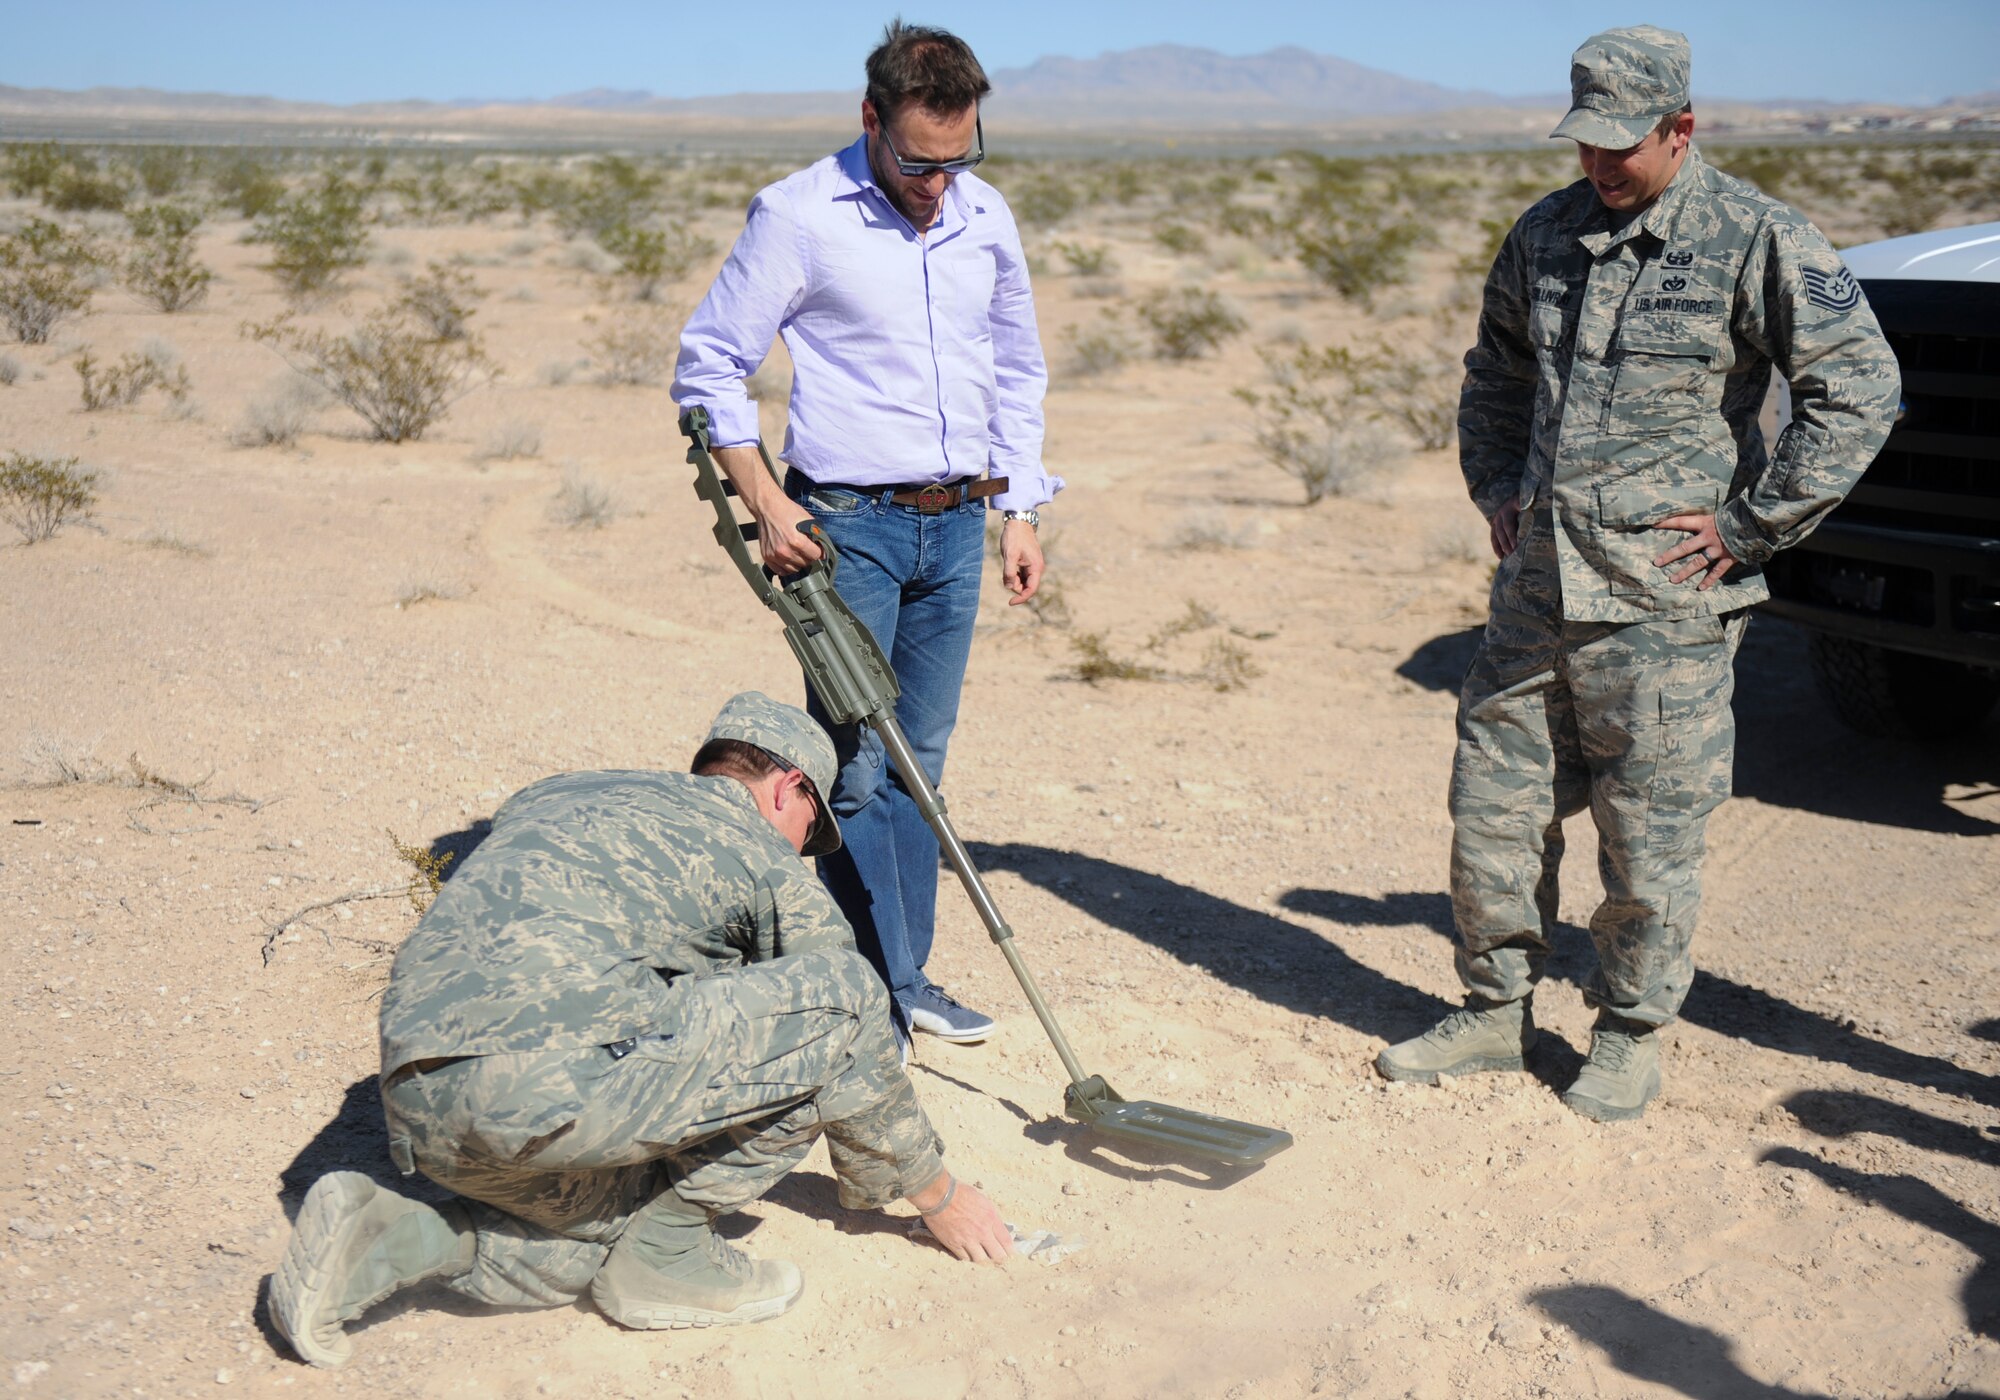 Simon Sinek, an internationally renowned speaker and author, uses a metal detector to locate a mine set up by Explosive Ordinance Disposal Airmen at Nellis Air Force Base, Nev., Oct. 1, 2014. Sinek’s visit also included interactions with 99th Security Forces Squadron Military Working Dog handlers and 58th Rescue Squadron members, a visit to the 66th Rescue Squadron to look at the HH-60 Pave Hawk helicopter, and finished with a mission briefing at the Red Flag building. (U.S. Air Force photo by Airman 1st Class Mikaley Towle)